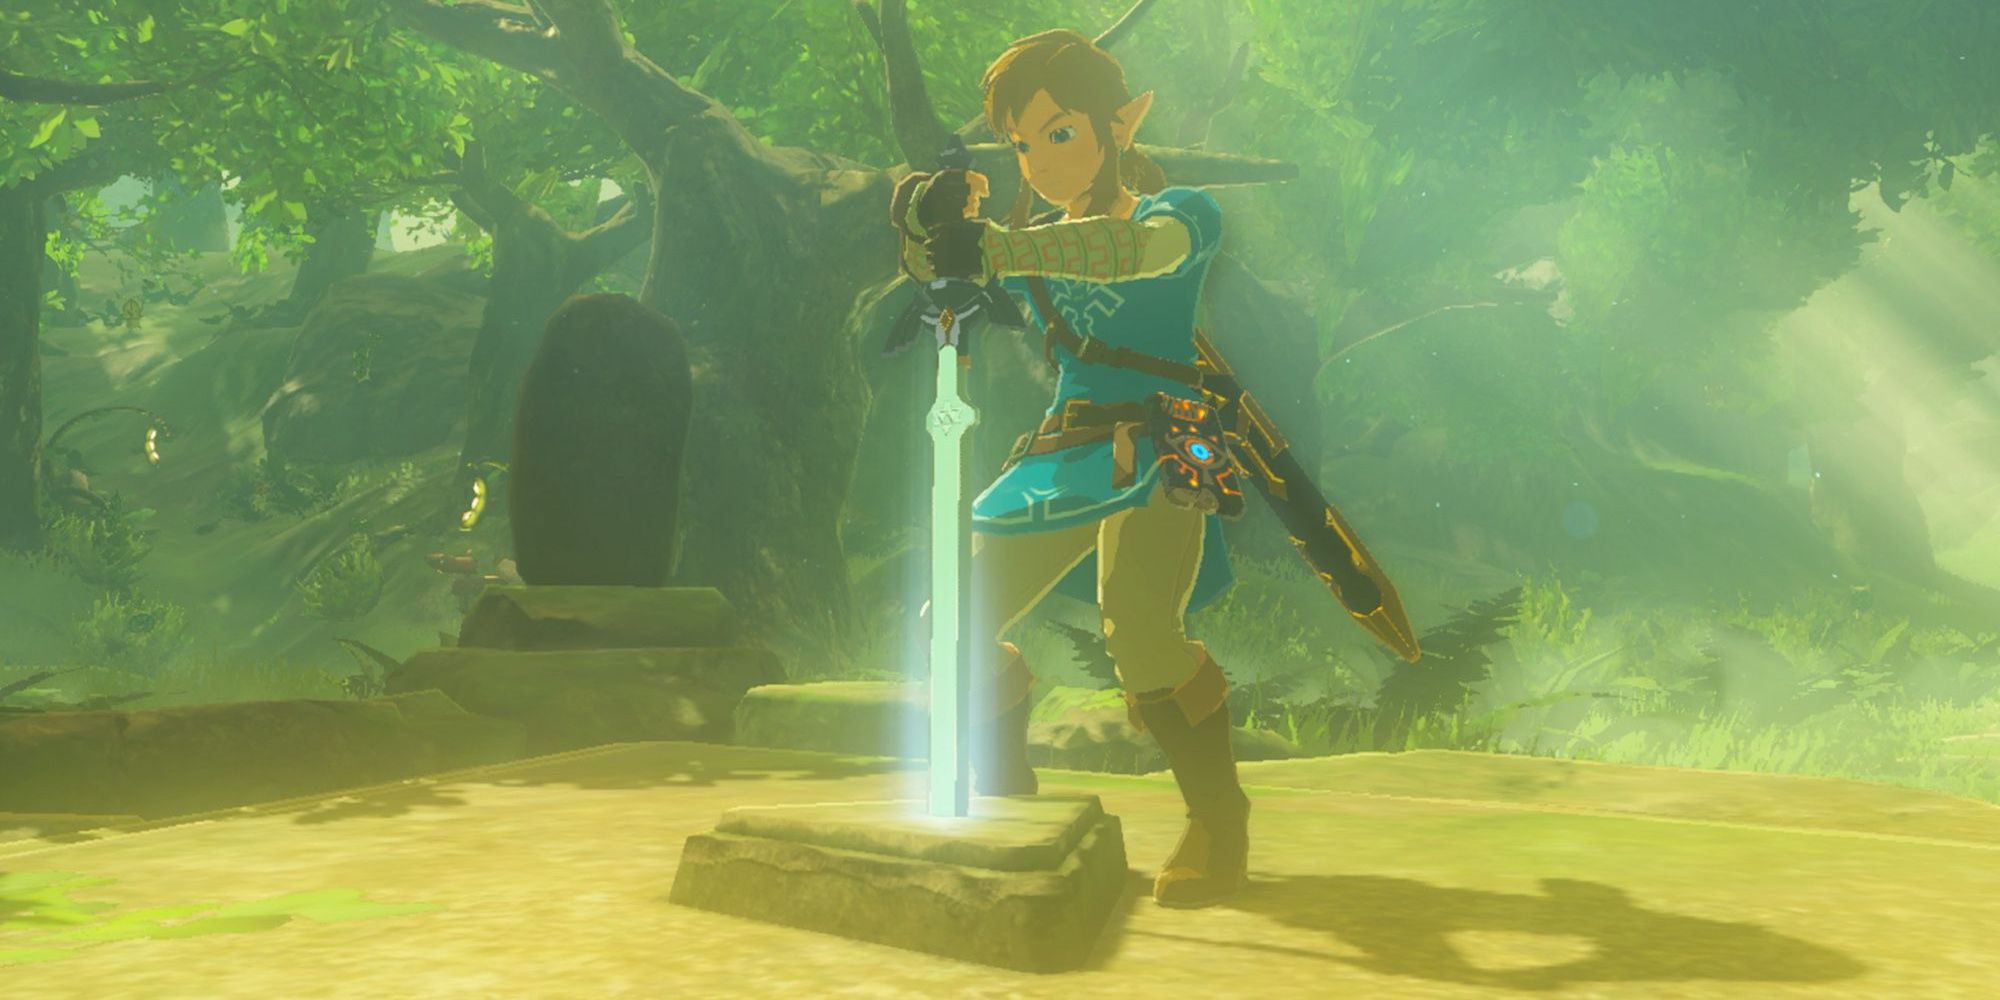 Link pulling the Master Sword from a stone in Legend of Zelda: Breath of the Wild